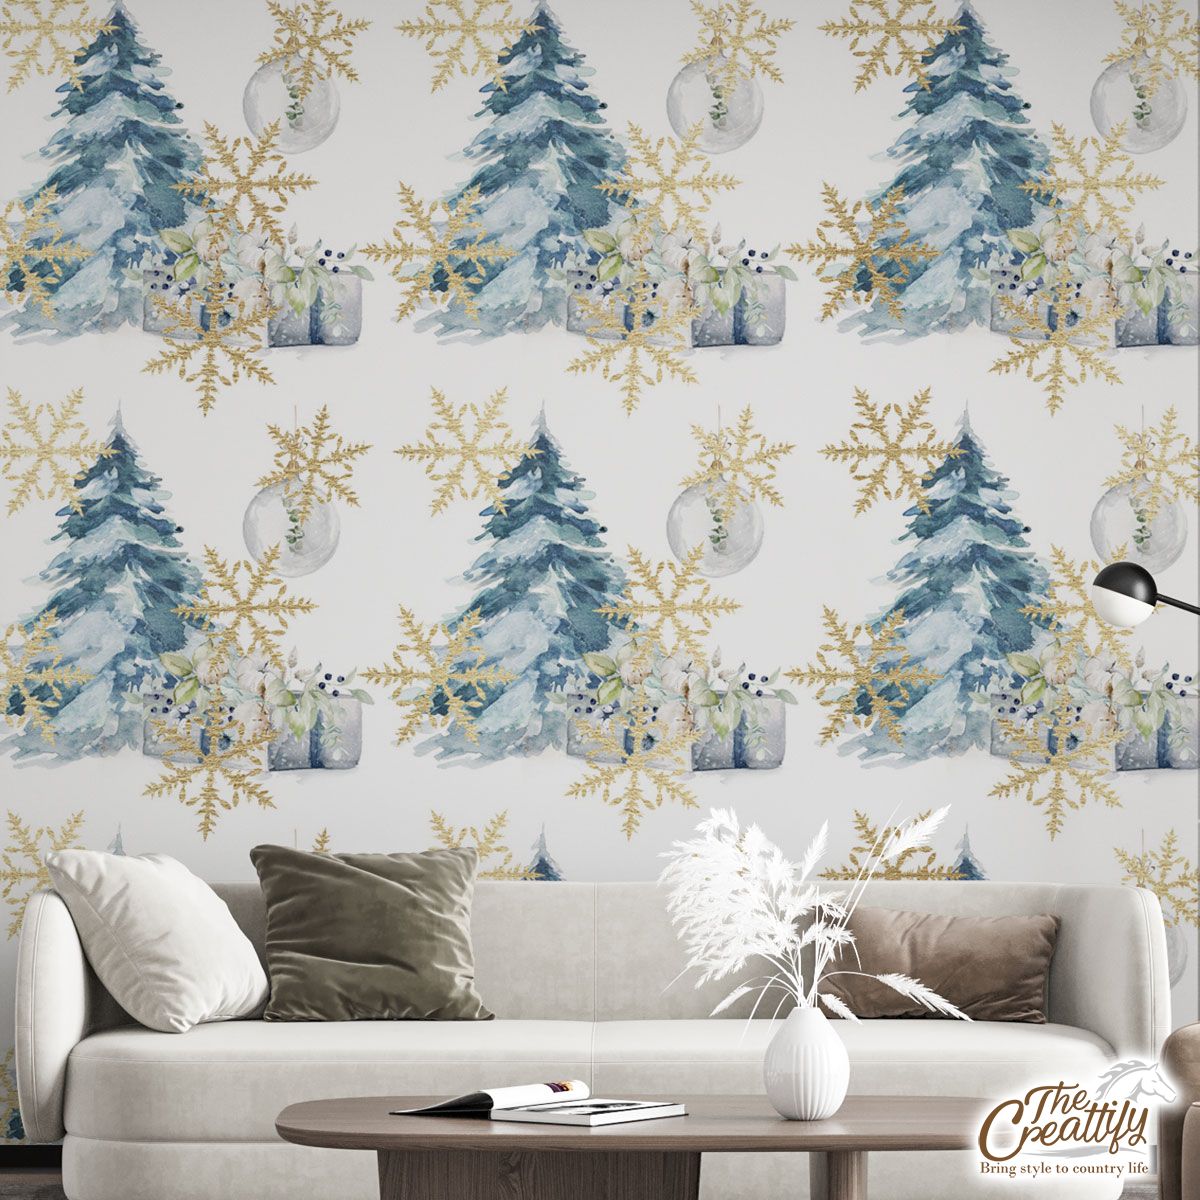 Chistmas Gifts, Gold Snowflake Clipart, Pine Tree And Chistmas Balls Seamless White Pattern Wall Mural